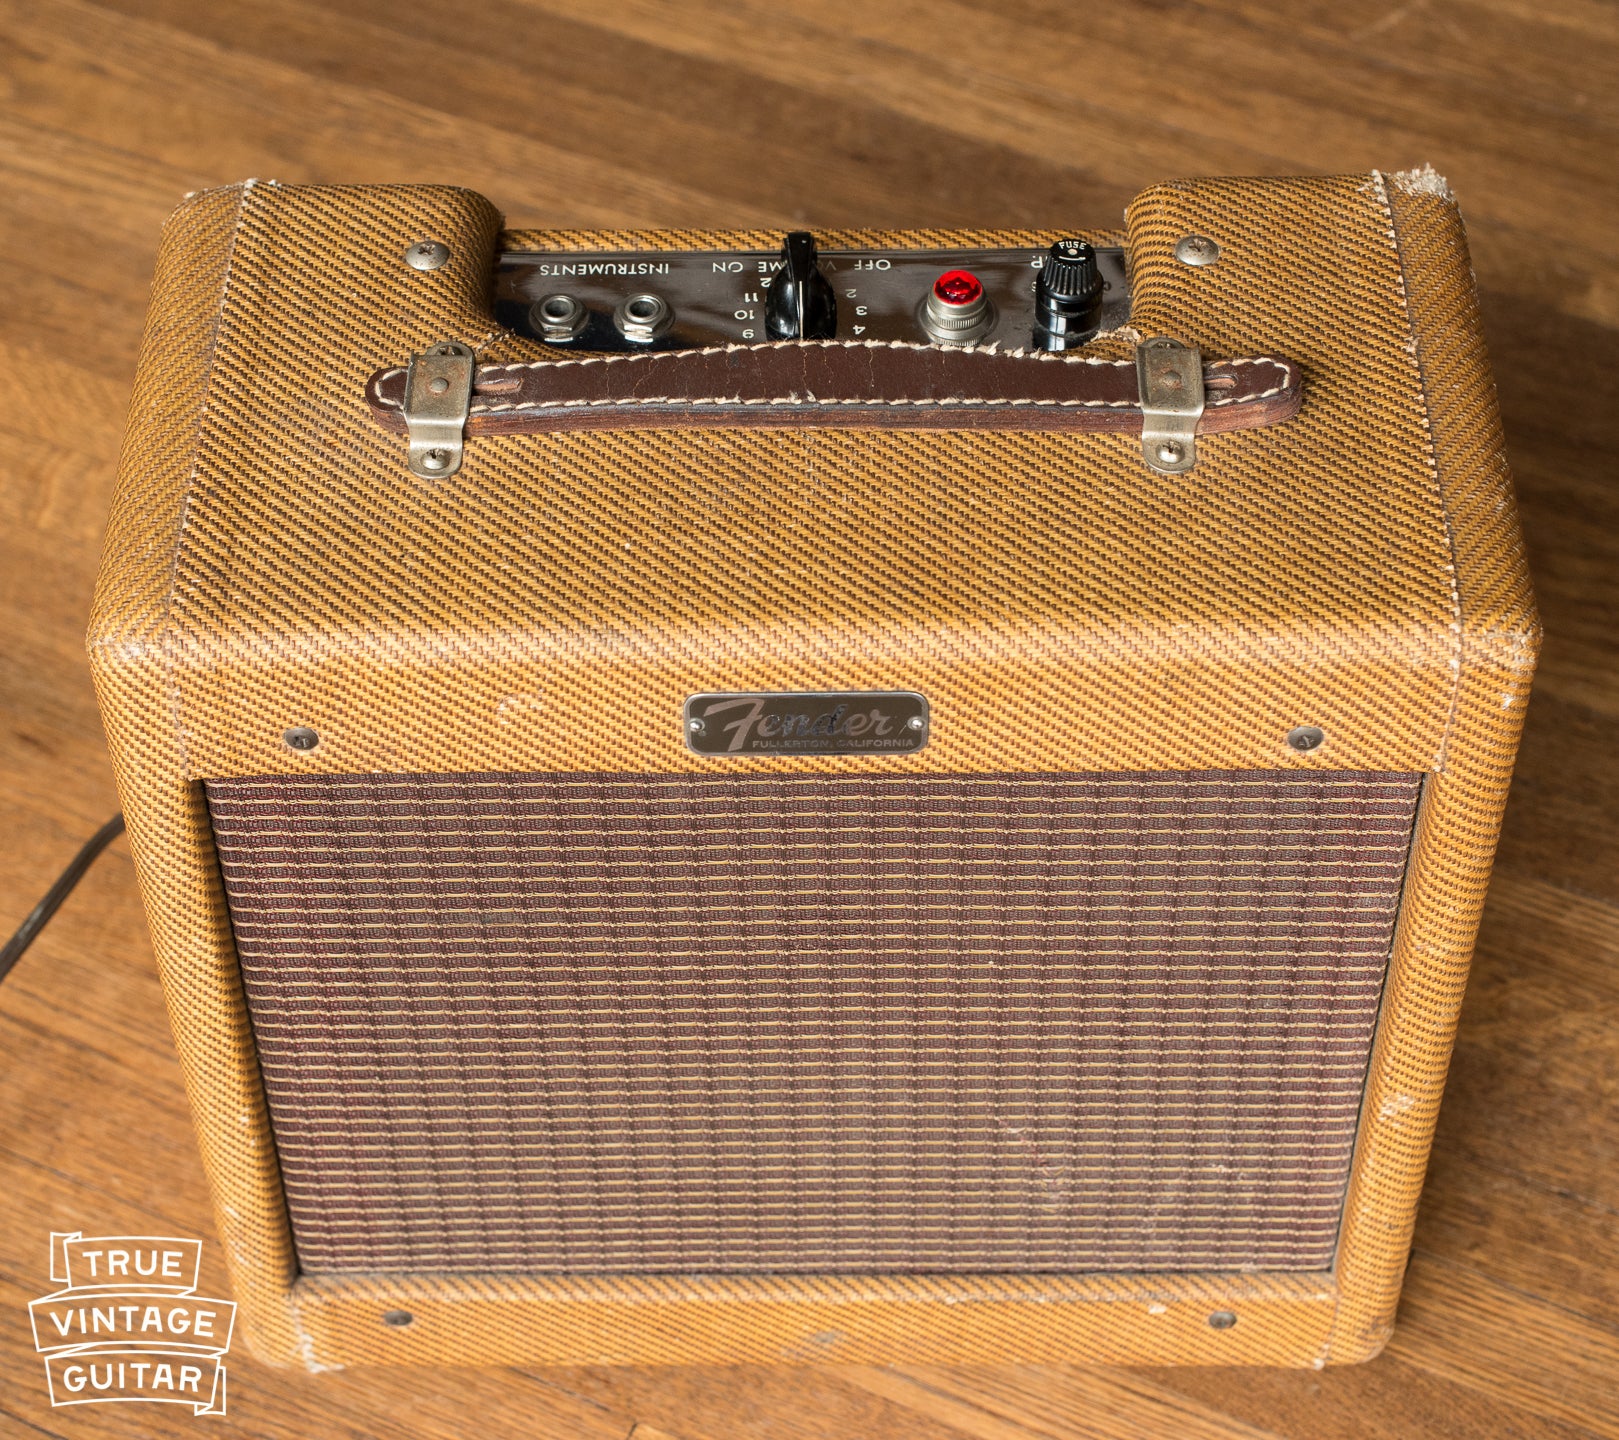 Where to sell vintage Fender amp